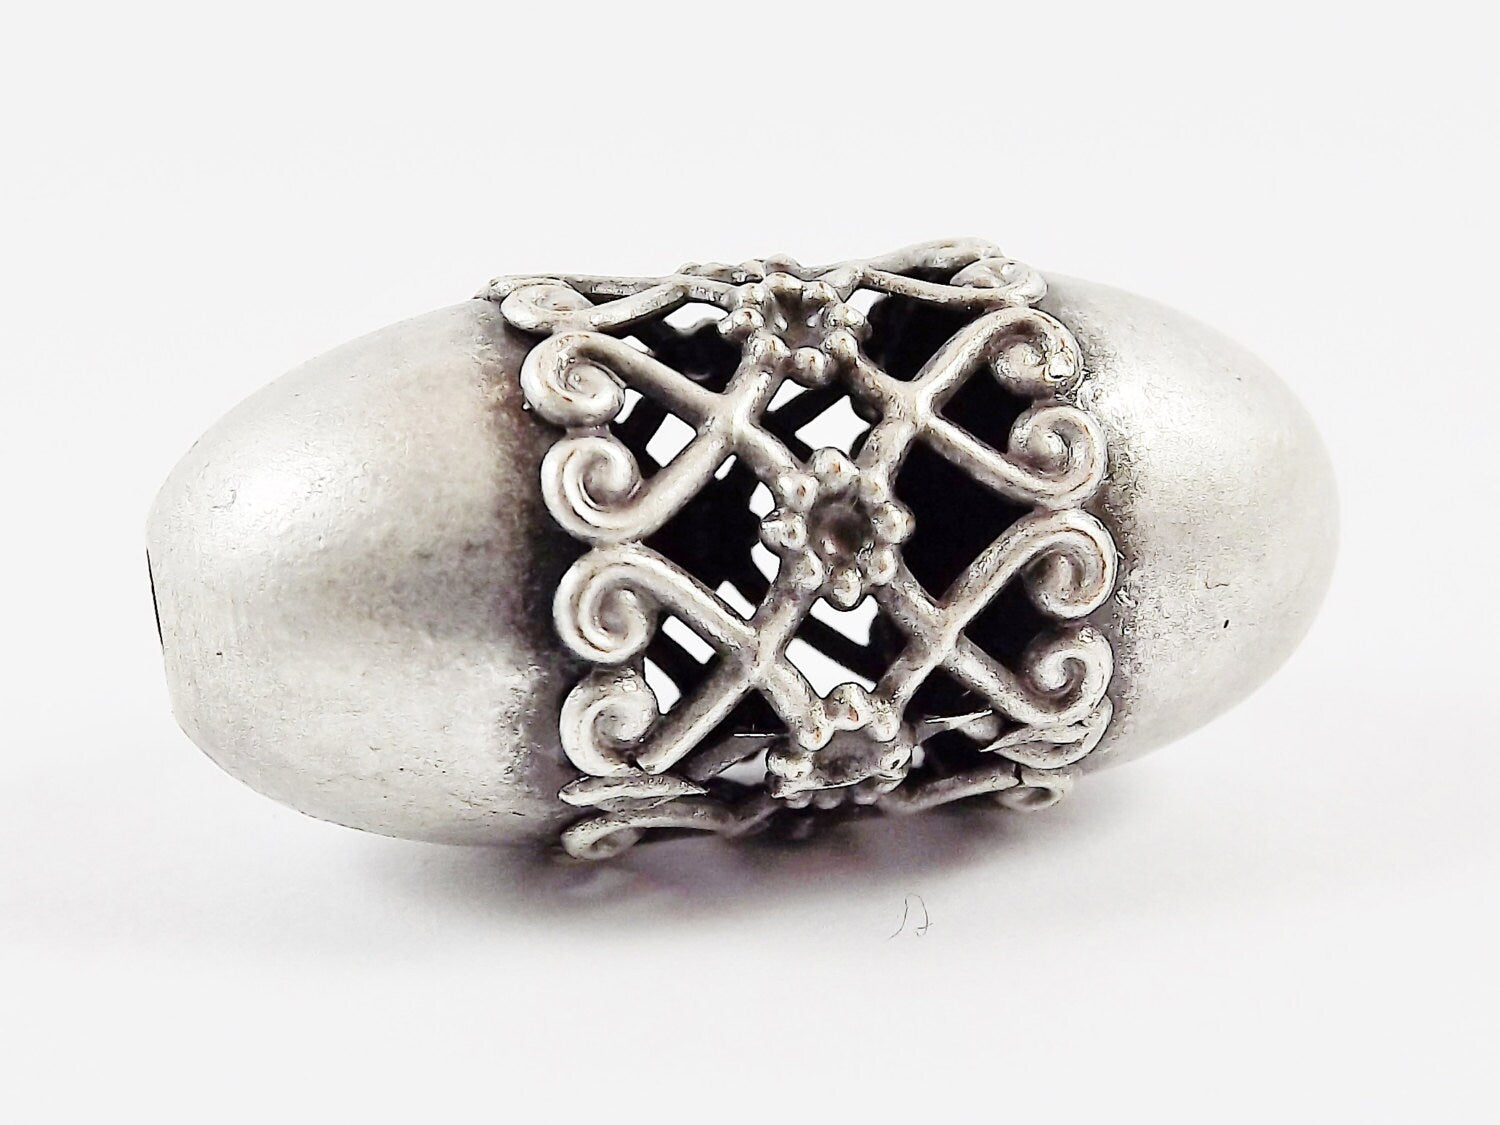 Large Filigree Banded Hollow Statement Ellipse Barrel Bead Spacer  - Matte Antique Silver Plated - 1PC - No:6